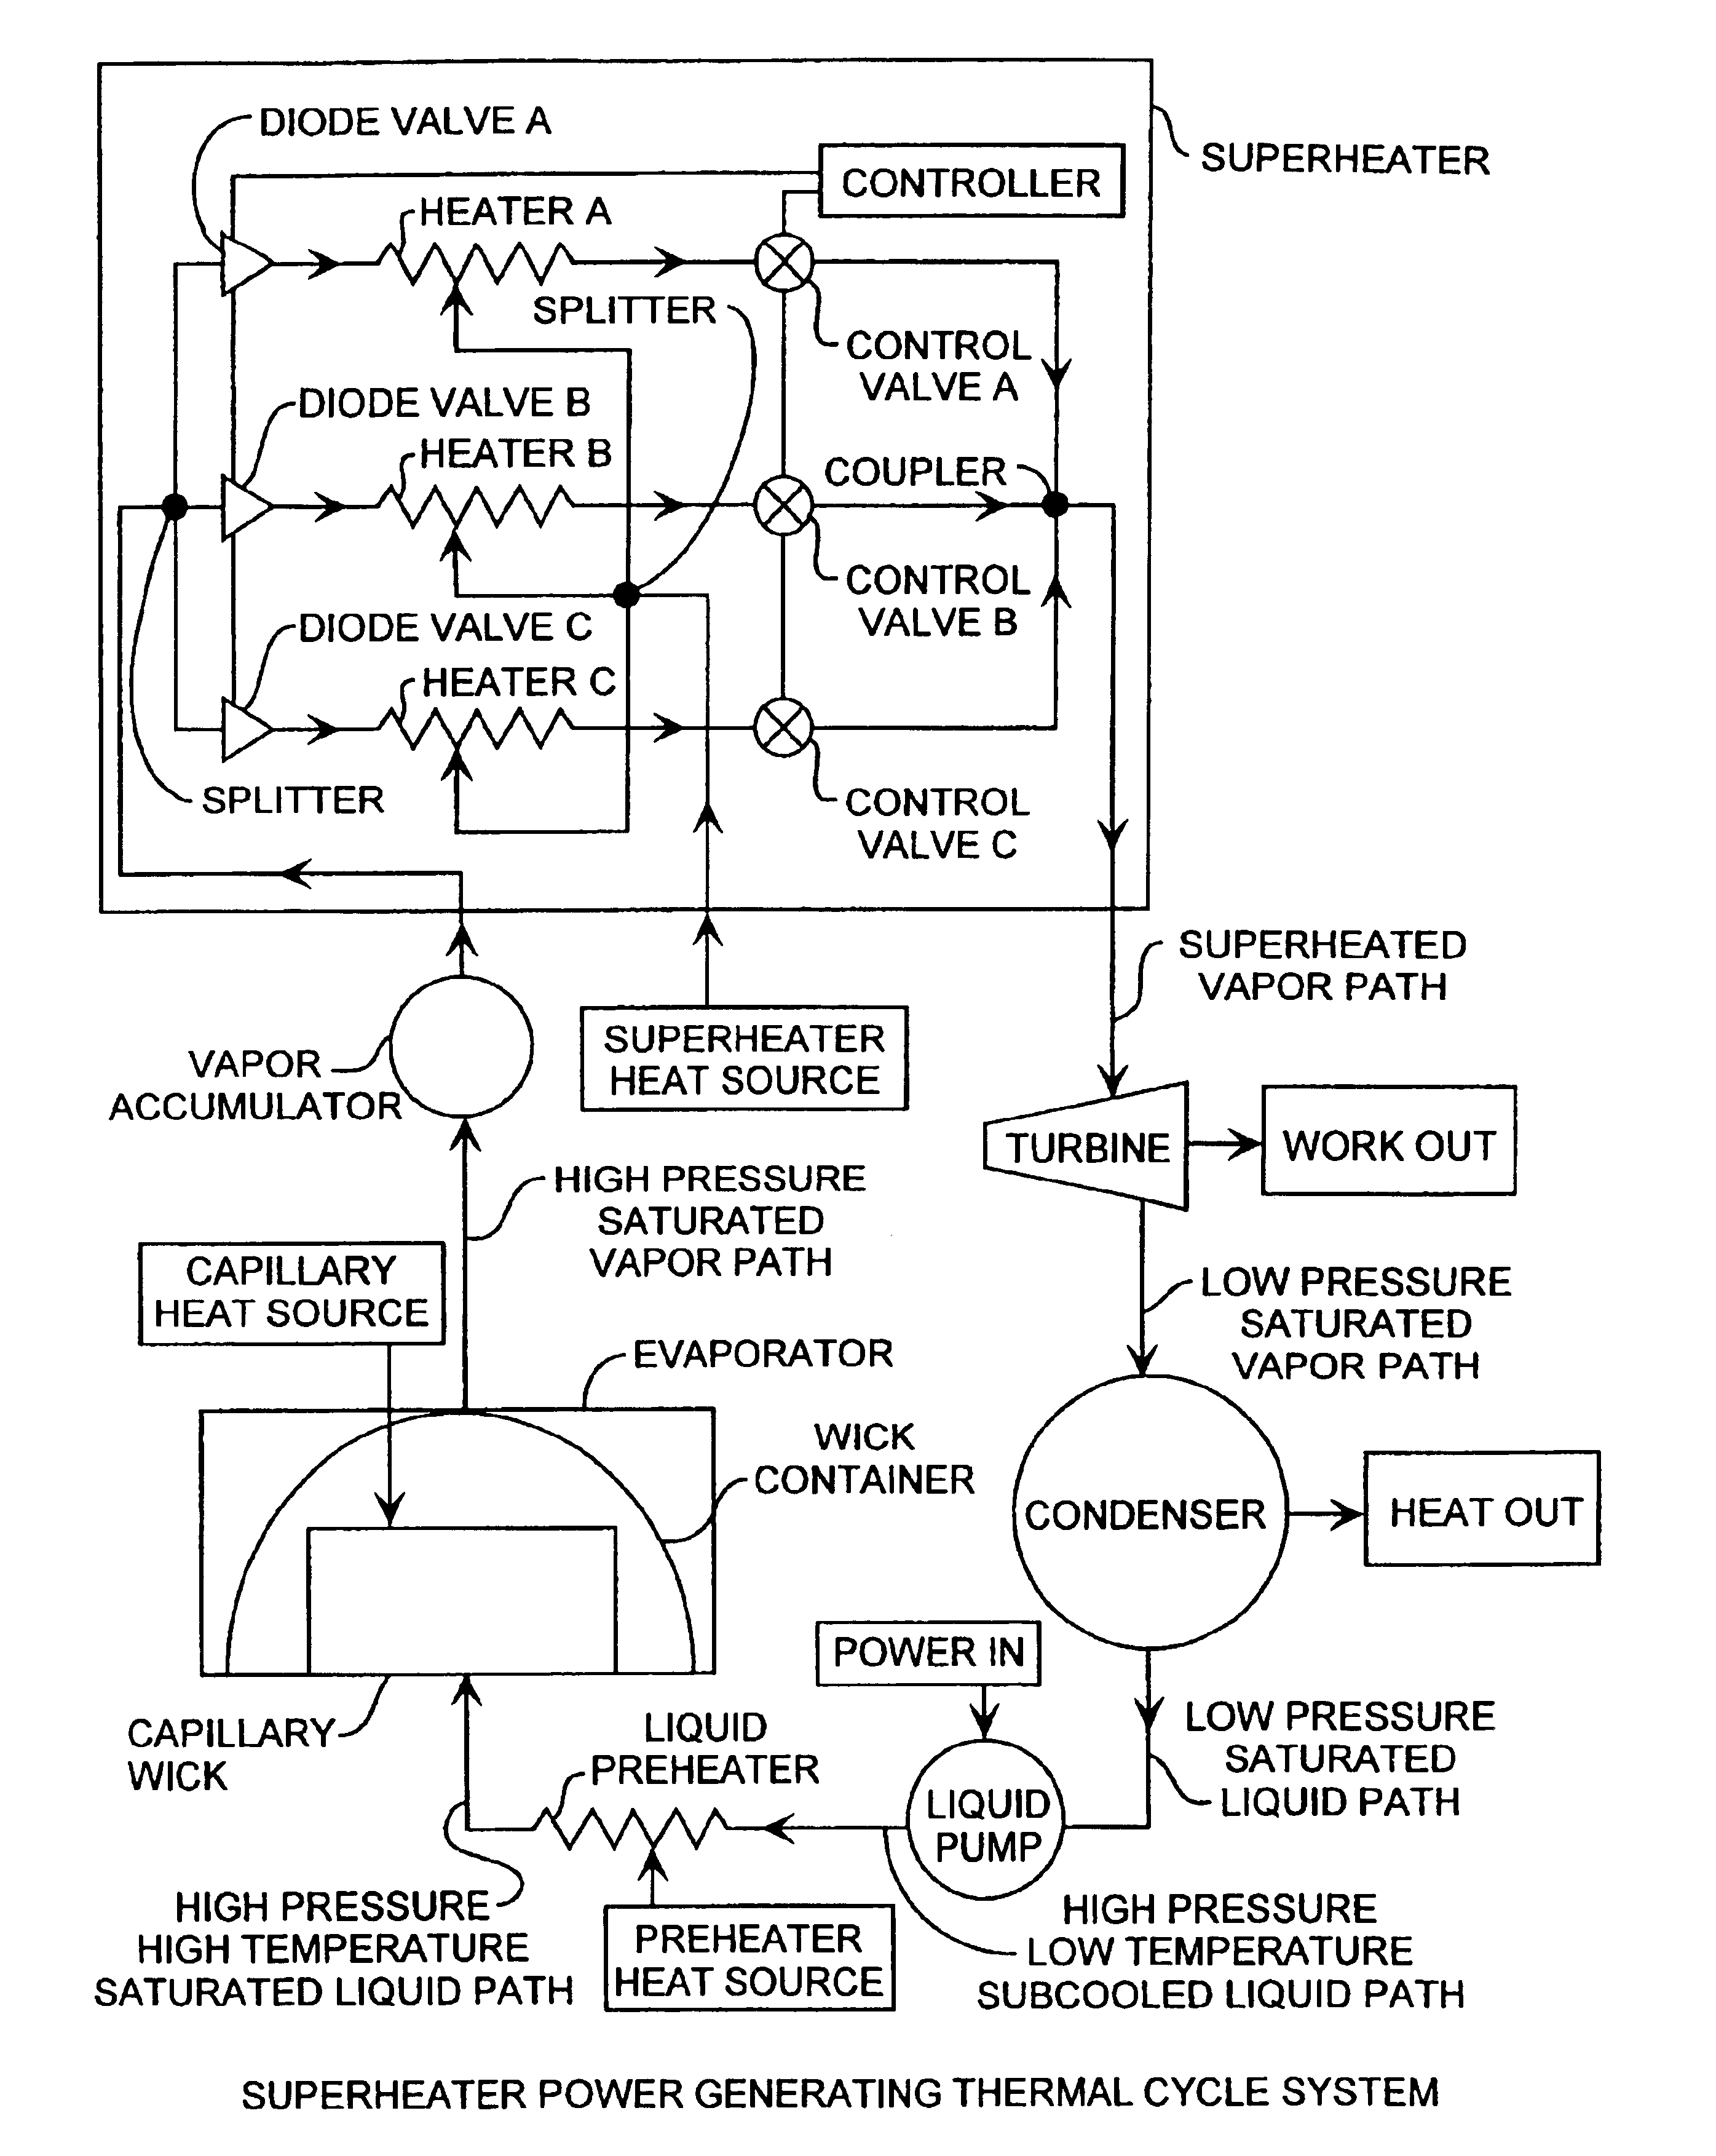 Superheater capillary two-phase thermodynamic power conversion cycle system